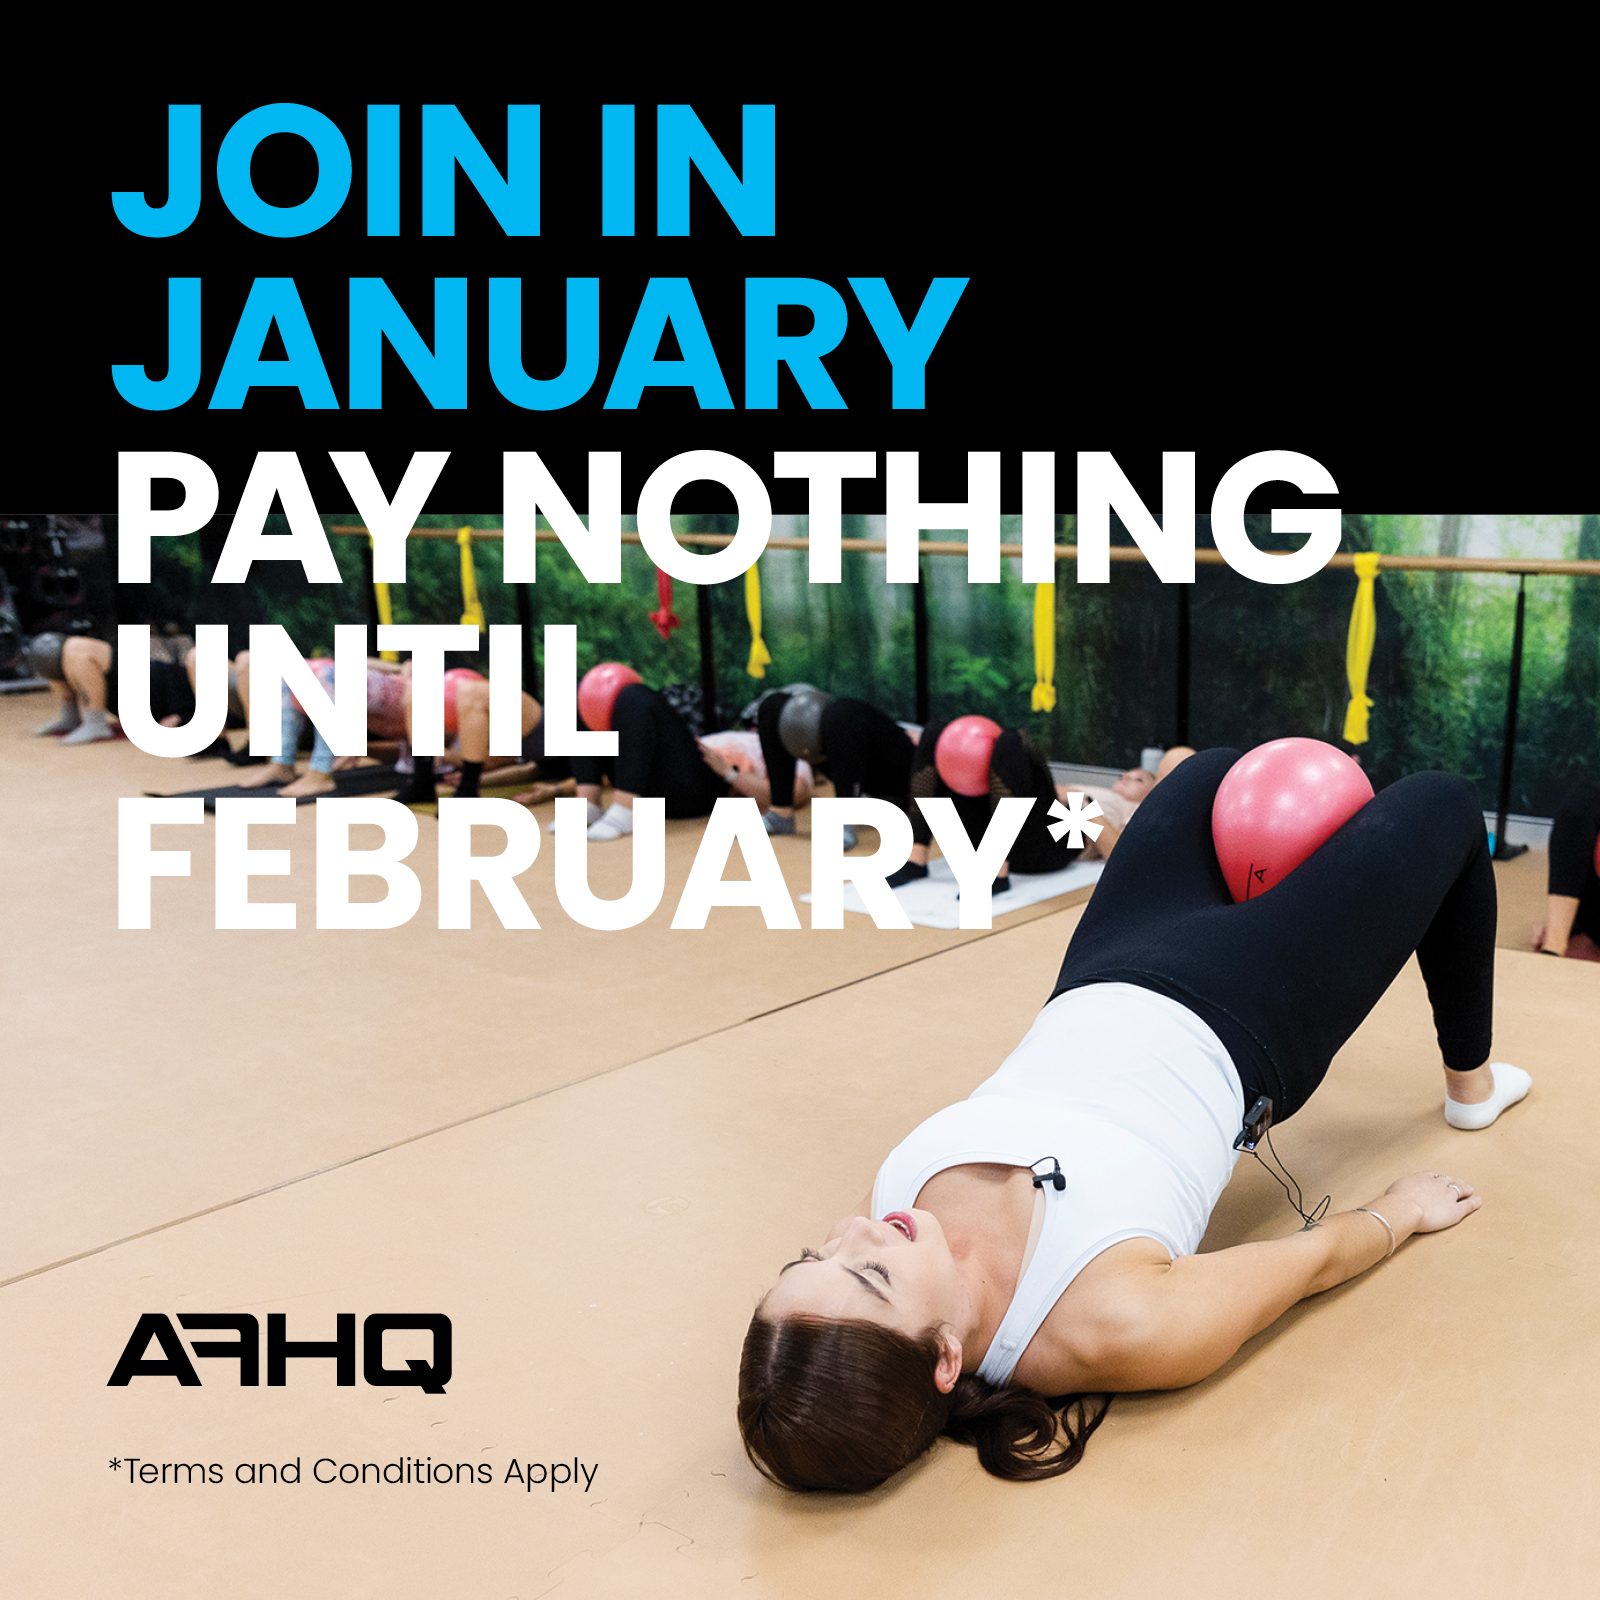 Pay Nothing in January